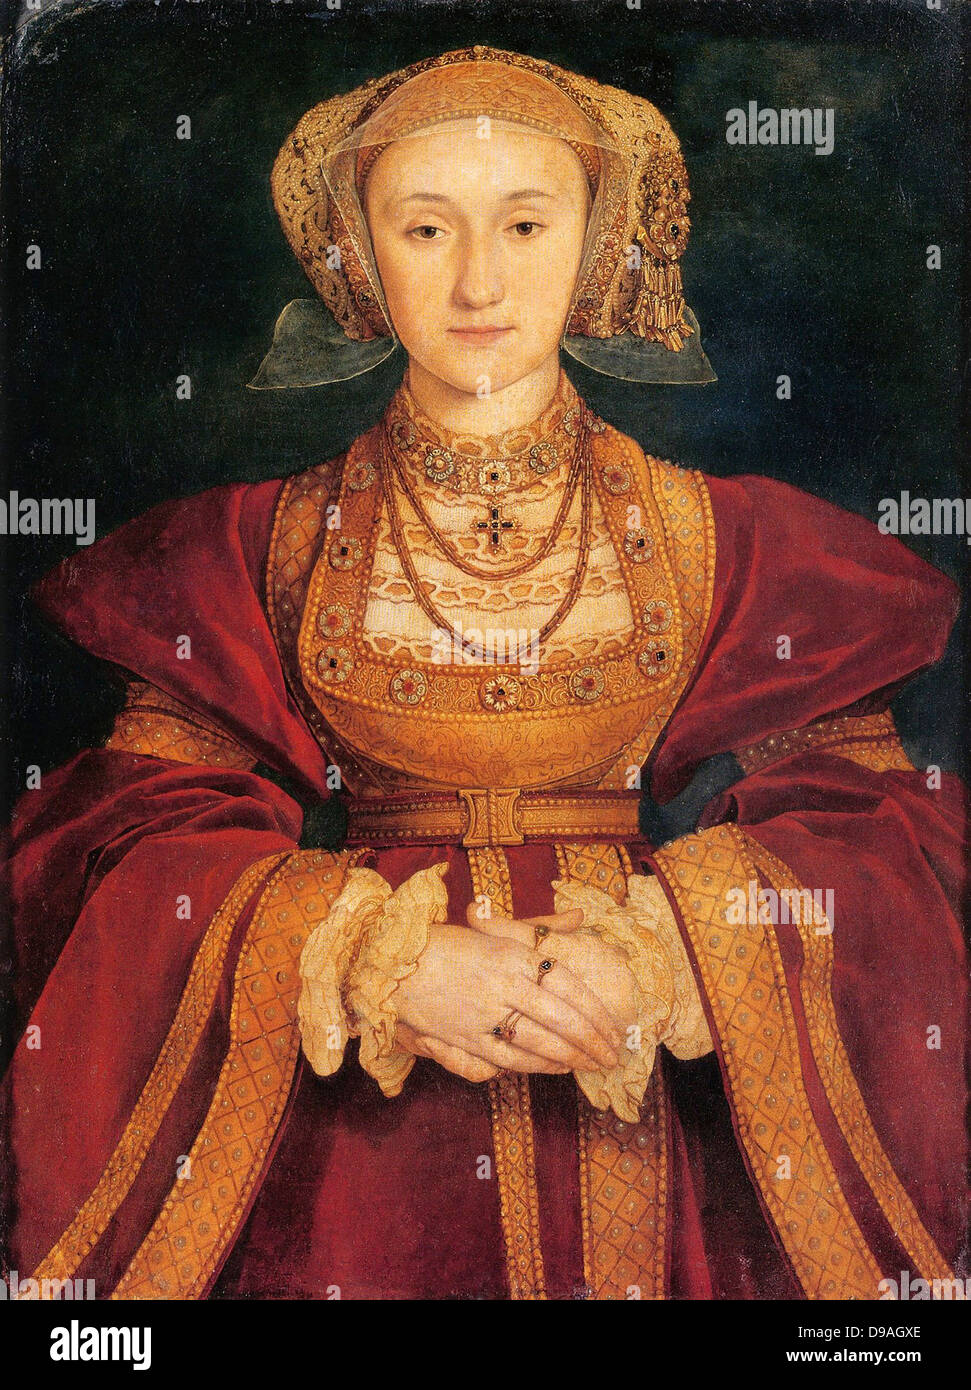 Anne of Cleves the fourth wife of Henry VIII. Stock Photo